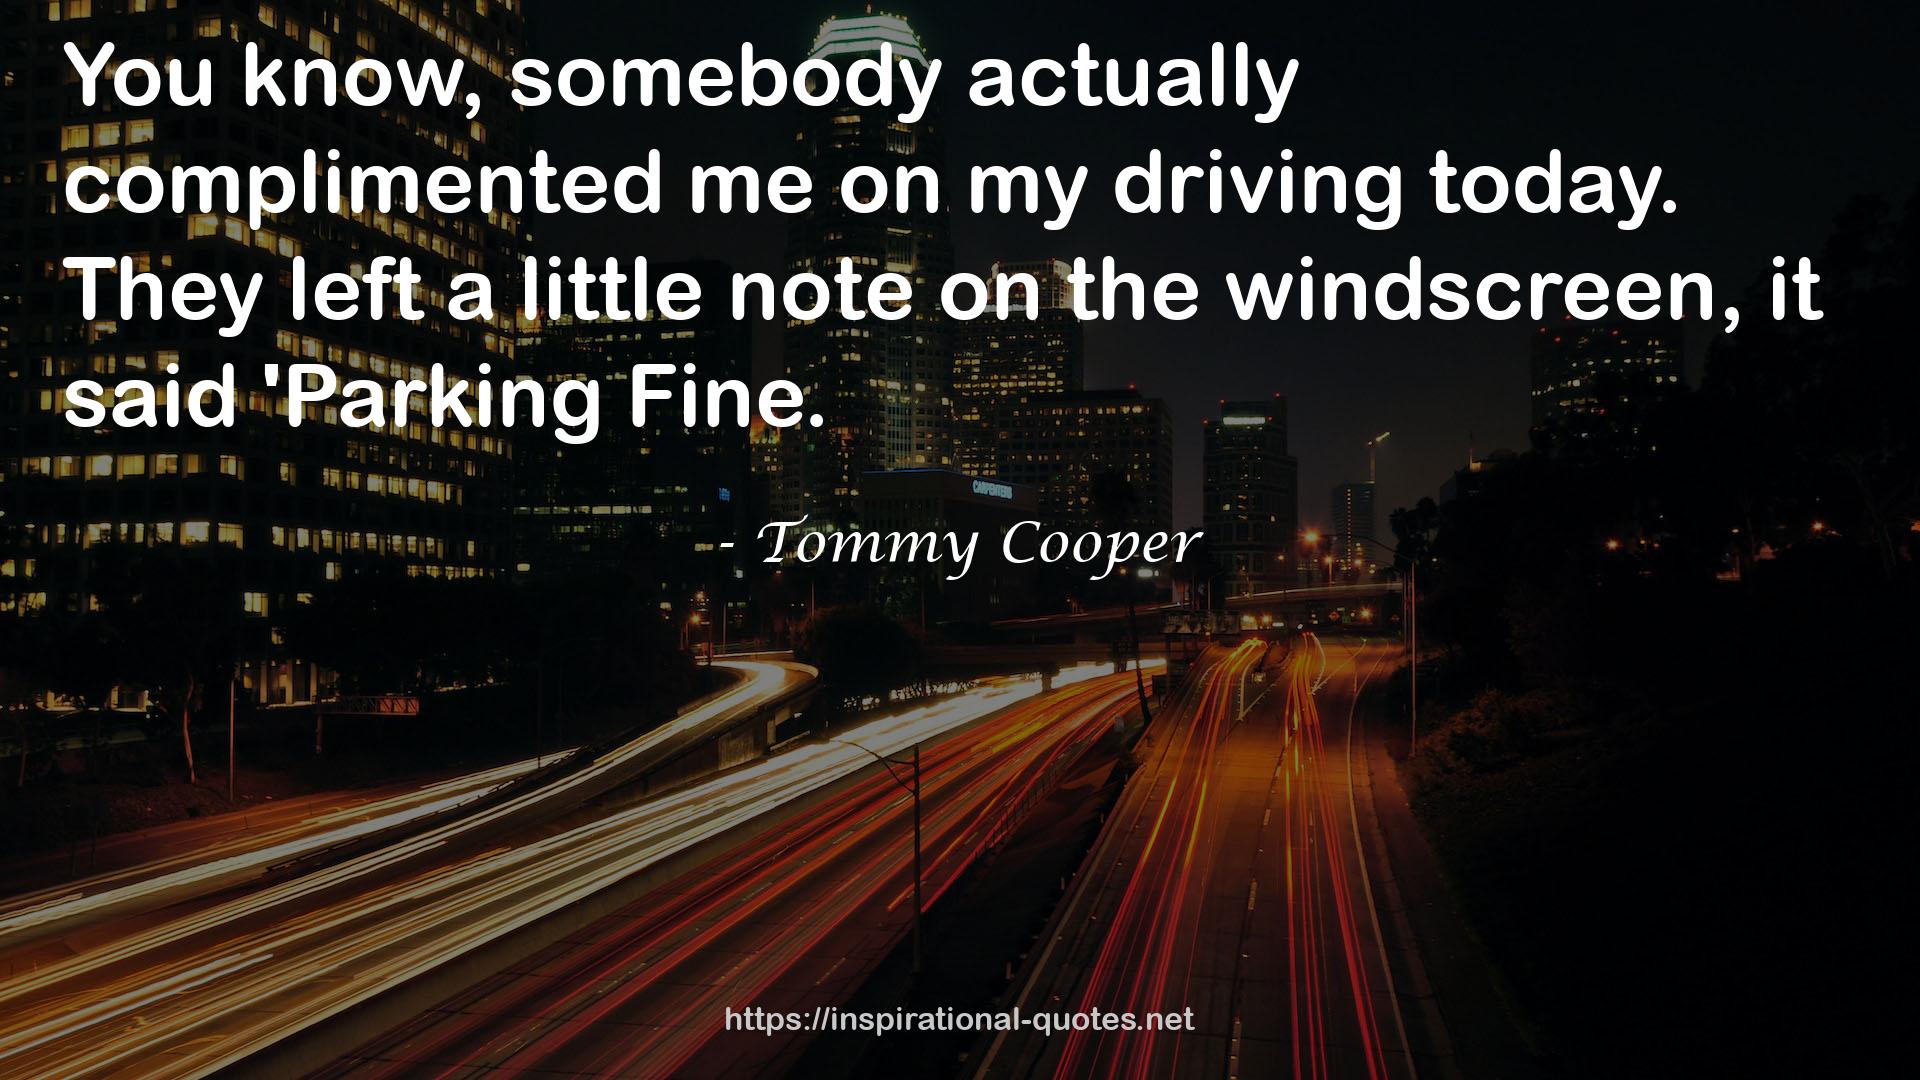 Tommy Cooper QUOTES